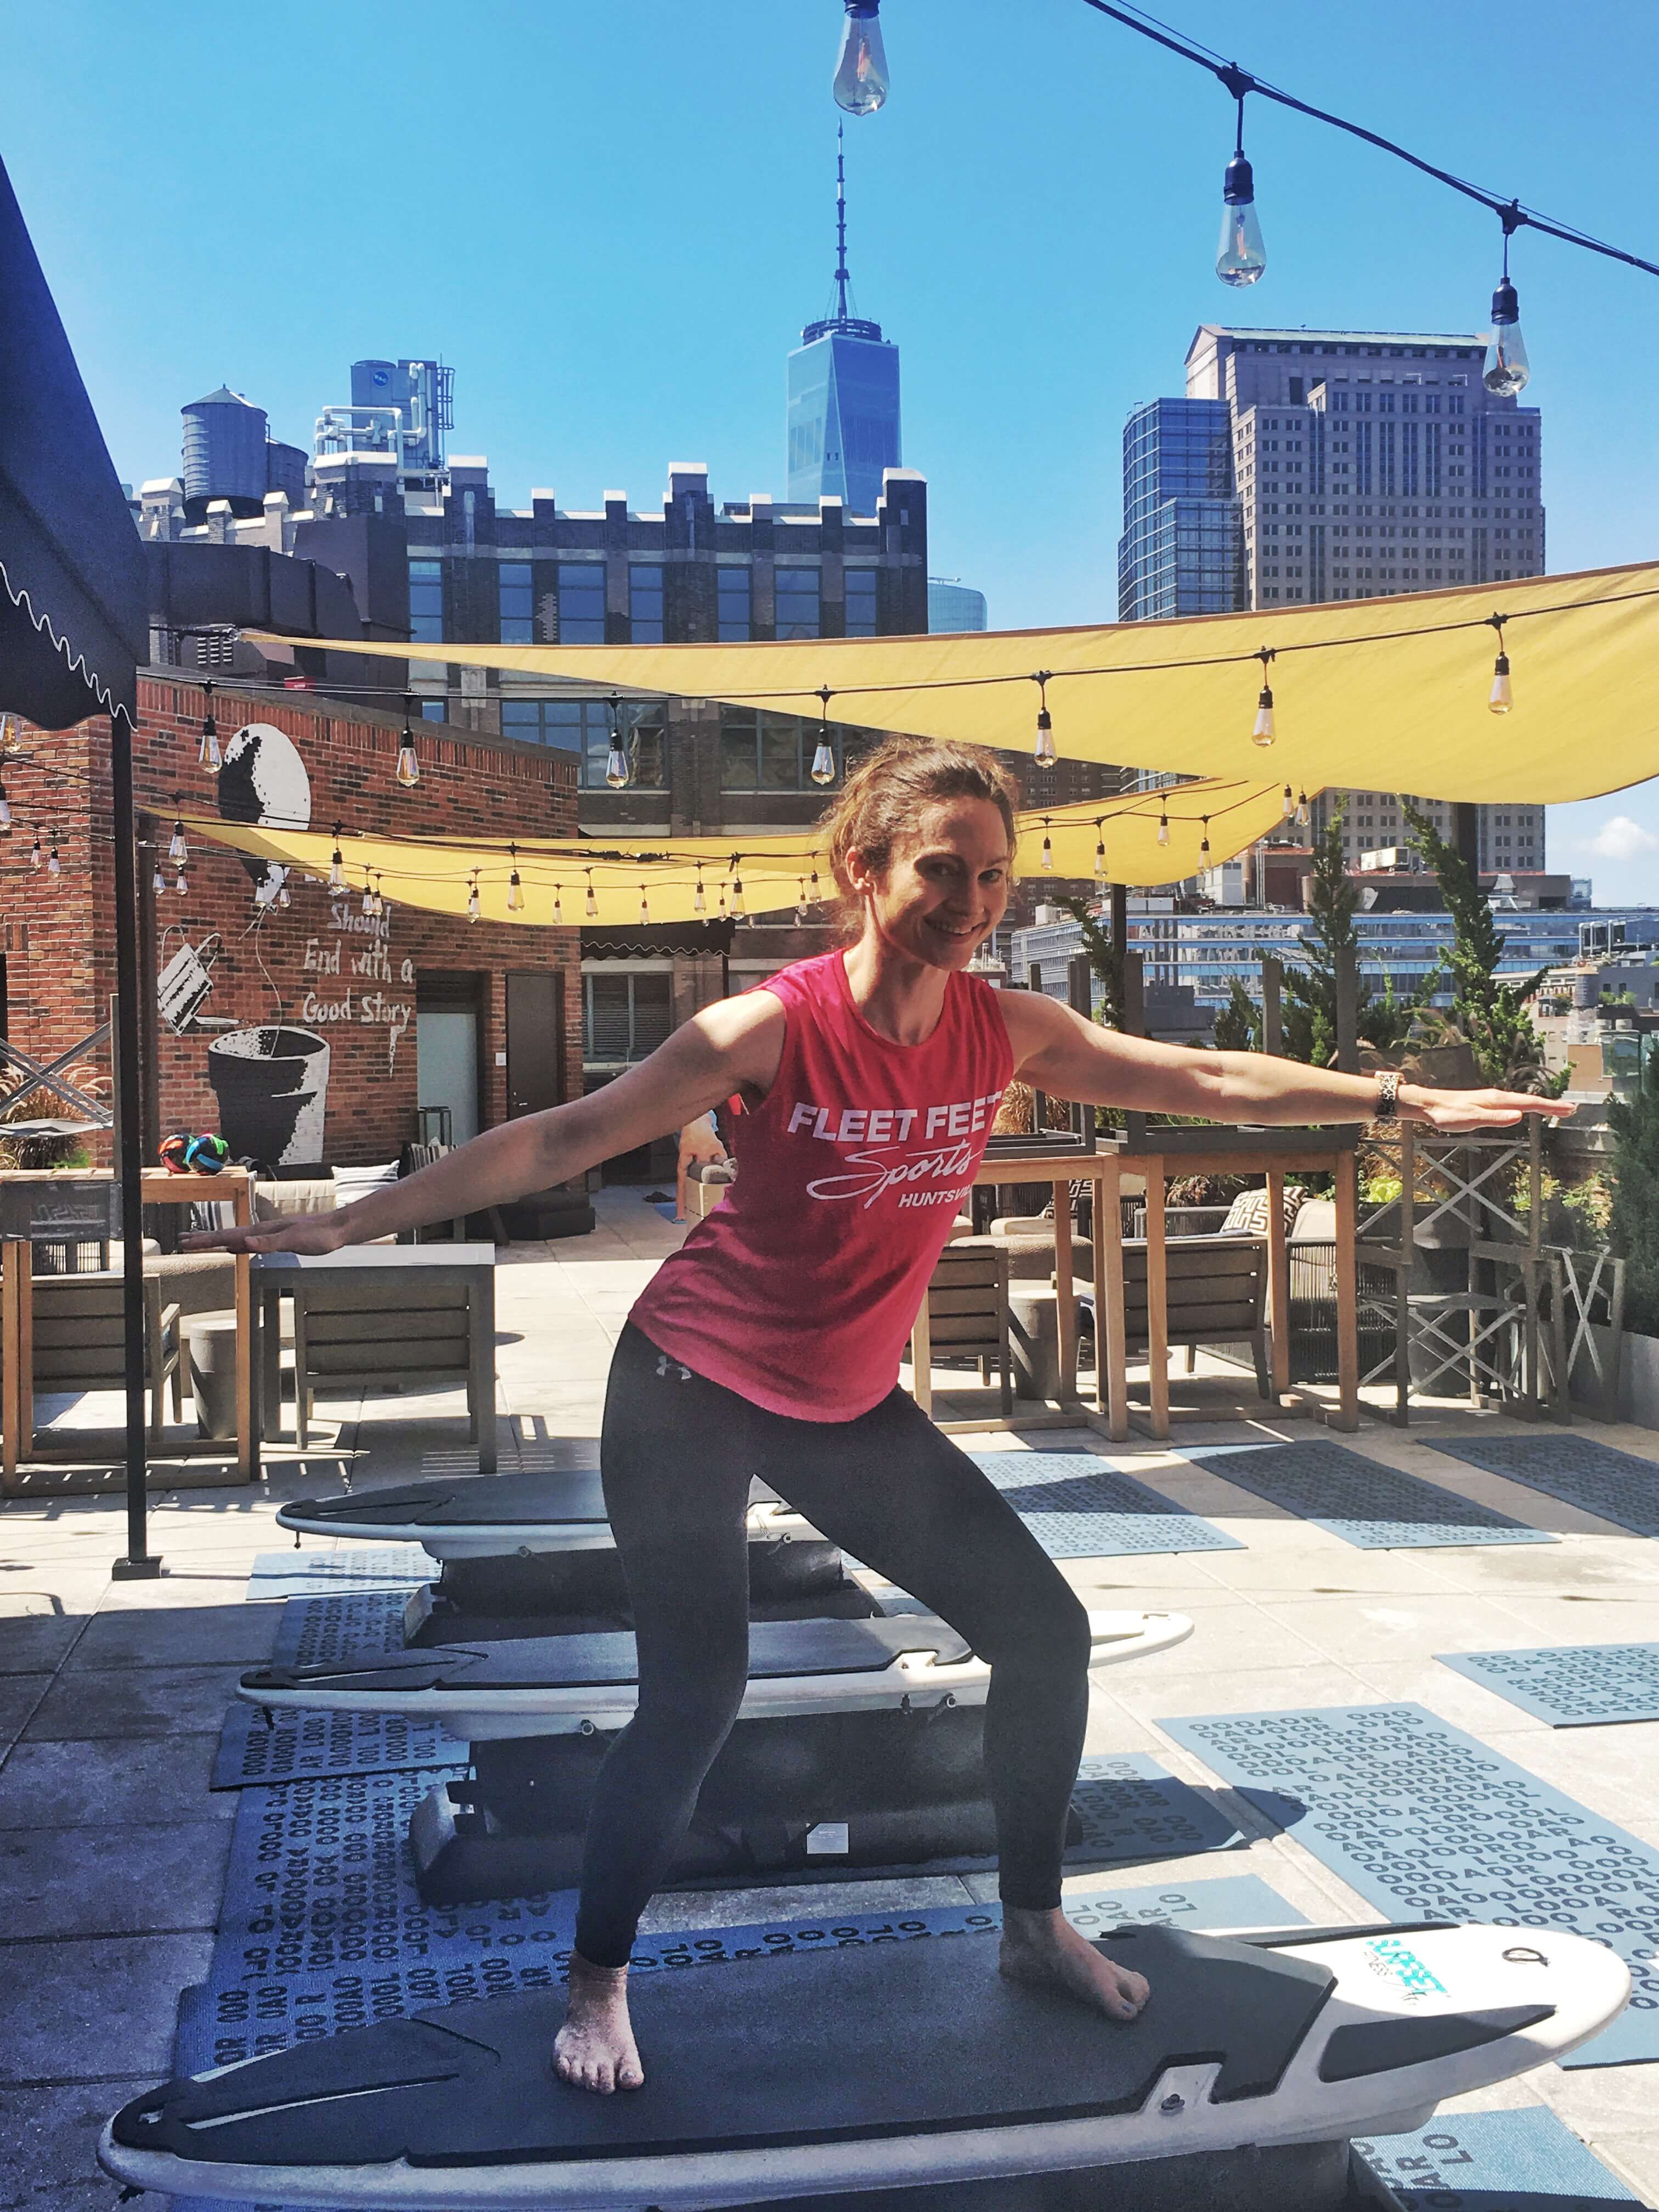 Surfset surfboard rooftop yoga top NYC workout - fitness studio on ClassPass - Stay in shape while traveling